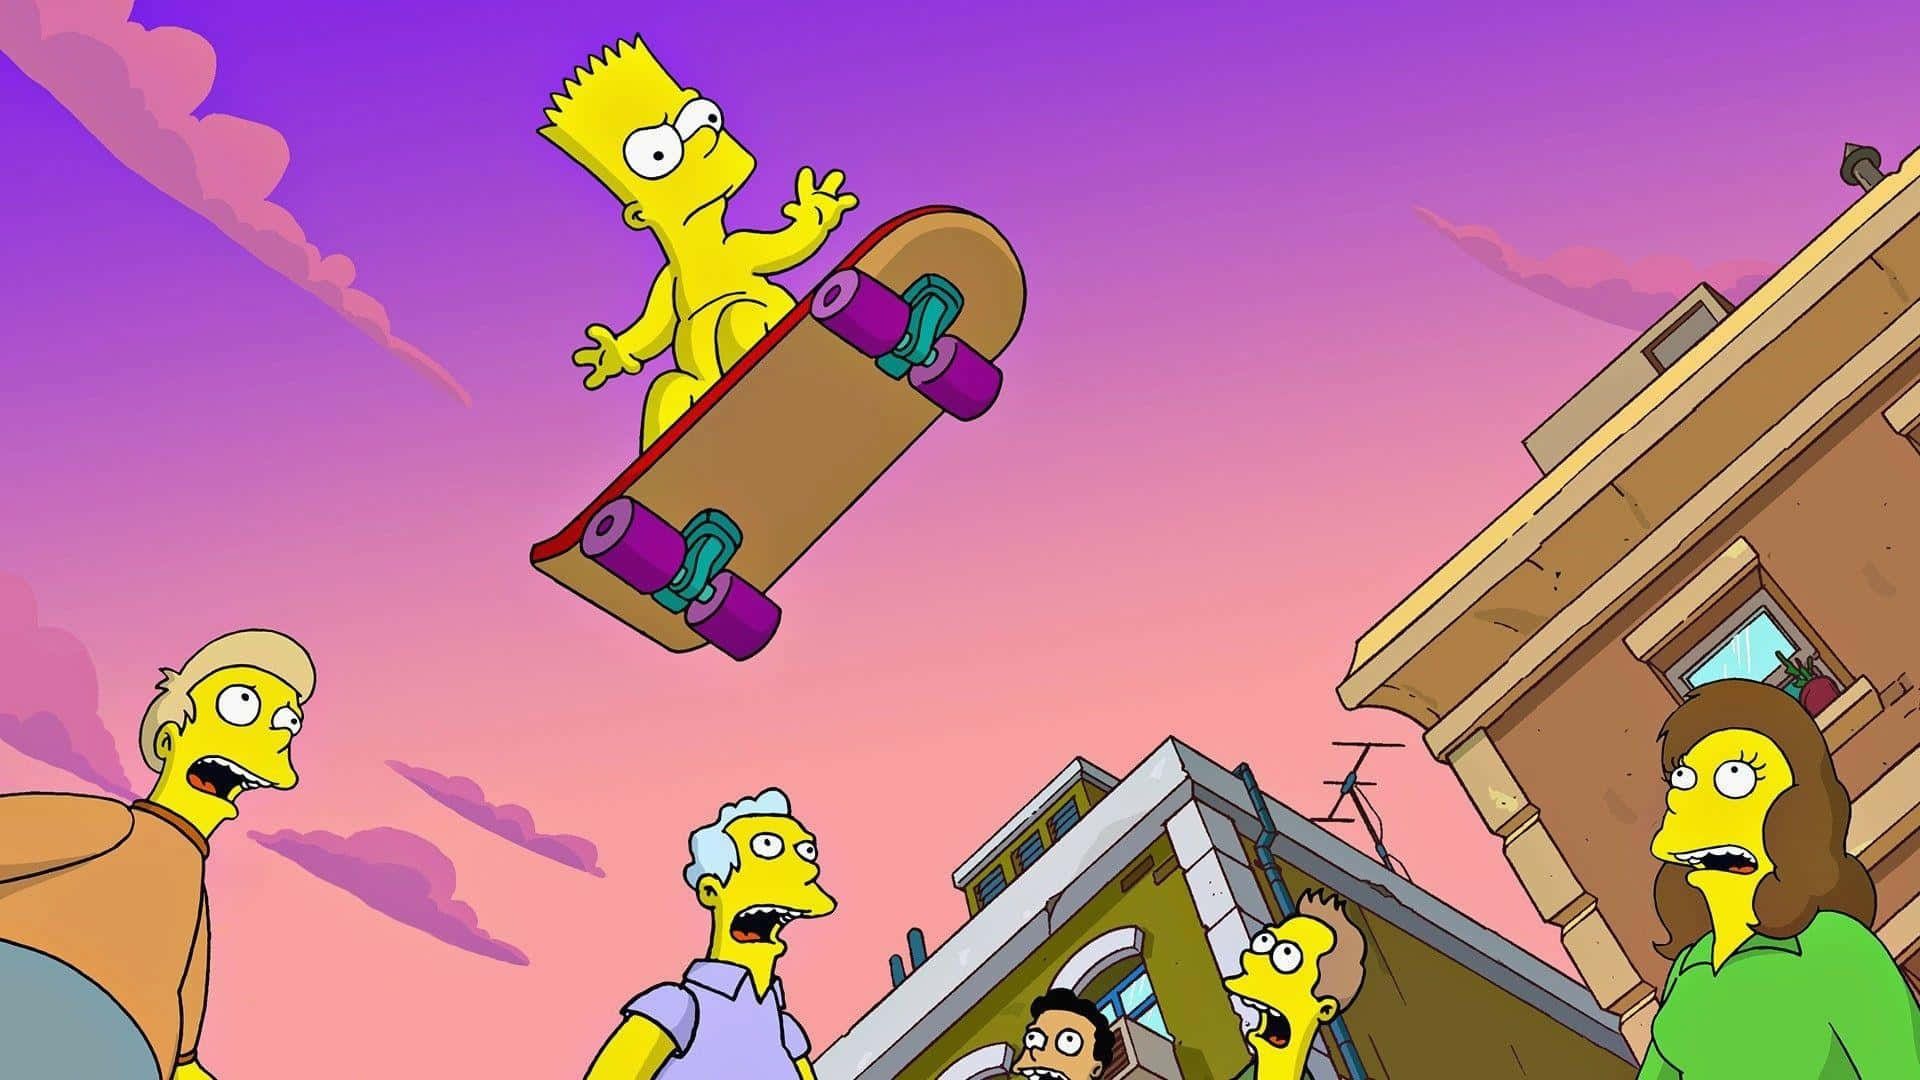 Get your gaming ready with Simpson Pc! Wallpaper